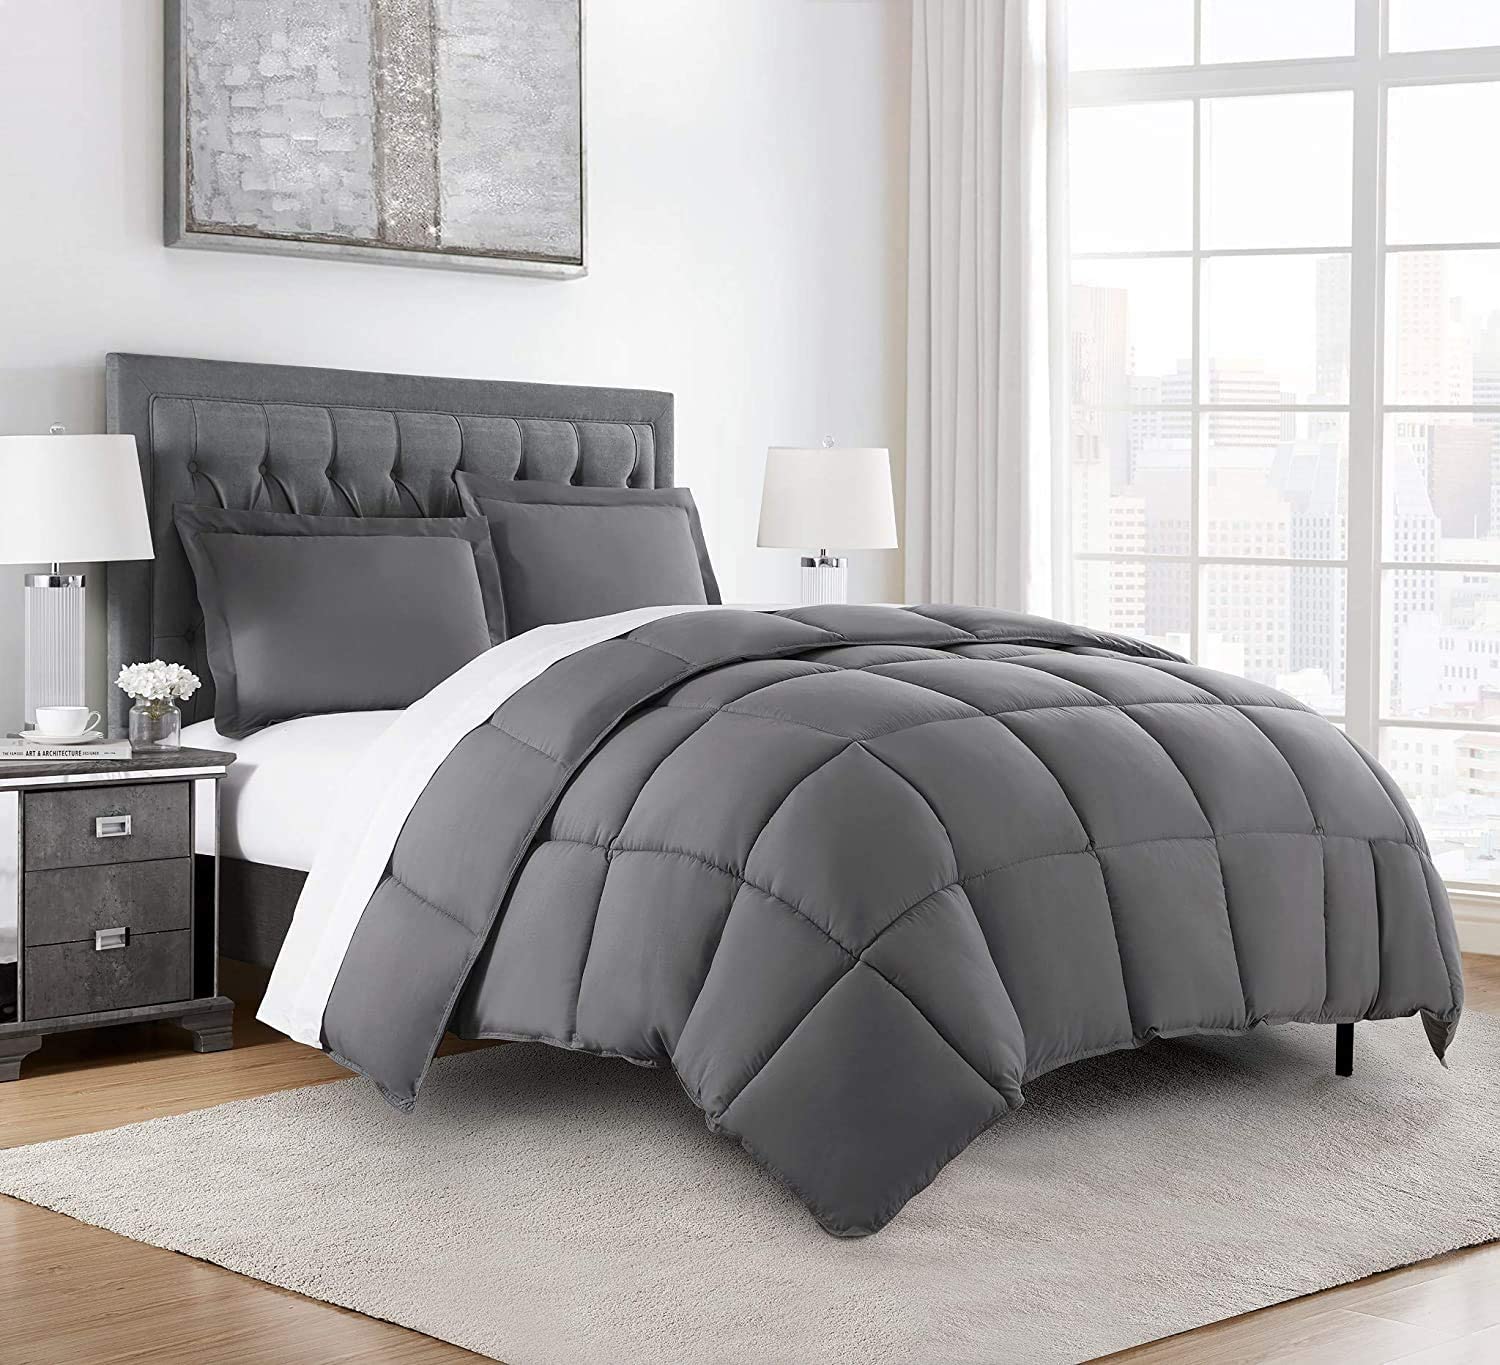 Home Collection Mayan Stamp All Season Down-Alternative Comforter Set, Grey, Full/Queen